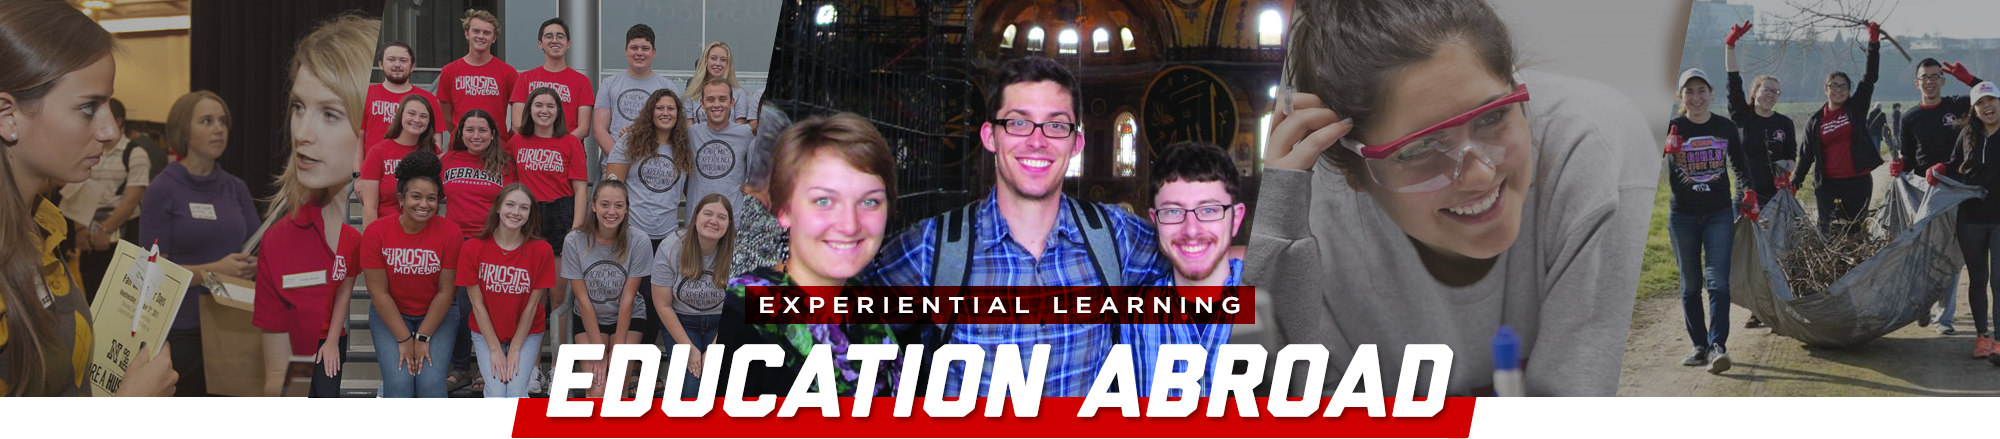 Education Abroad - Experiential Learning